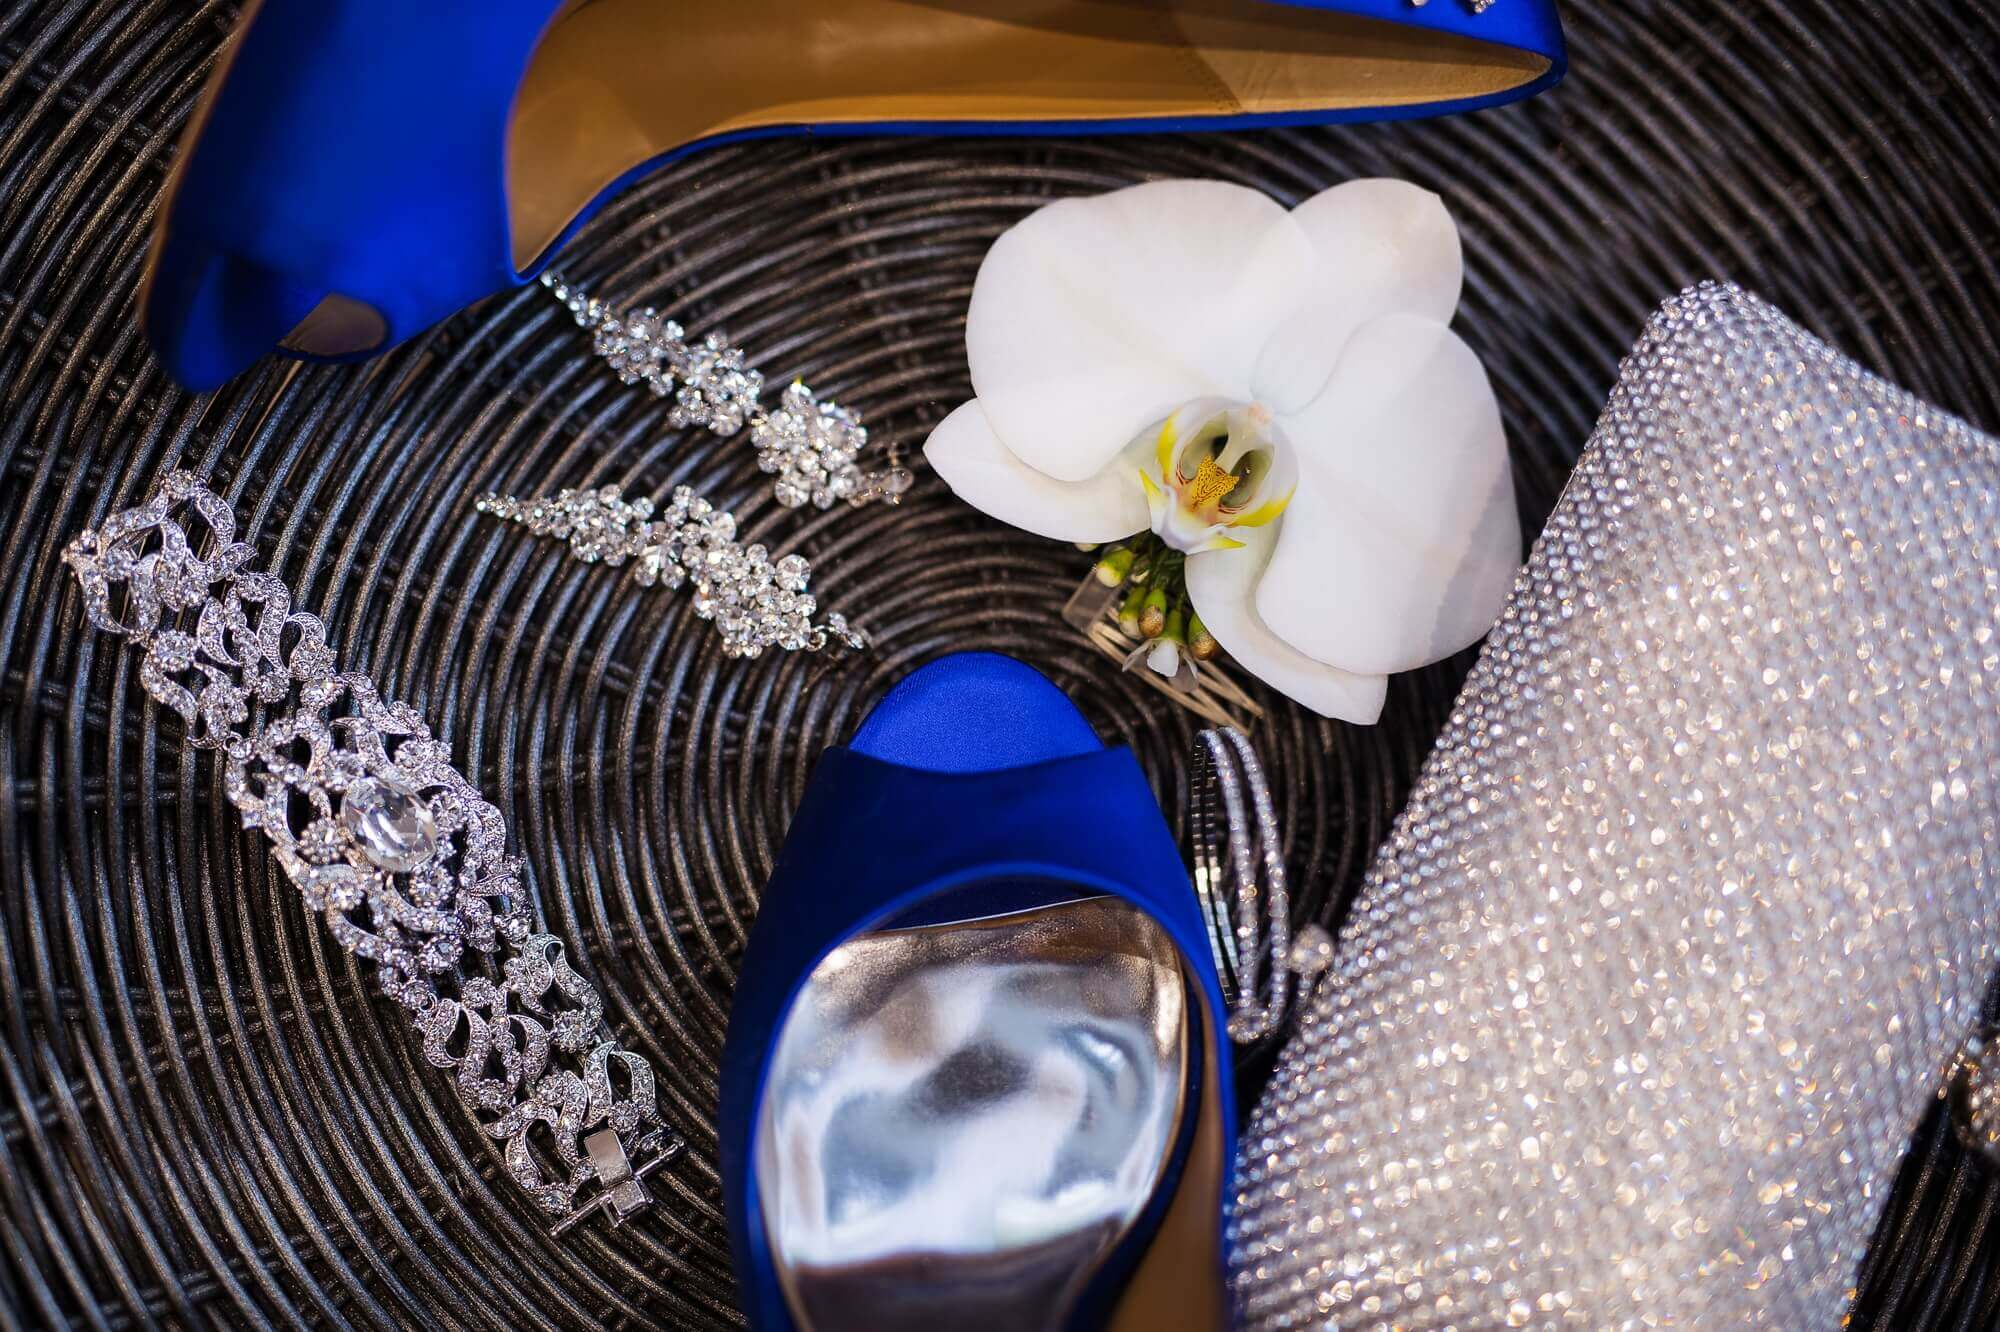 Details of the bride's wedding jewelry, sparkling clutch and blue wedding shoes